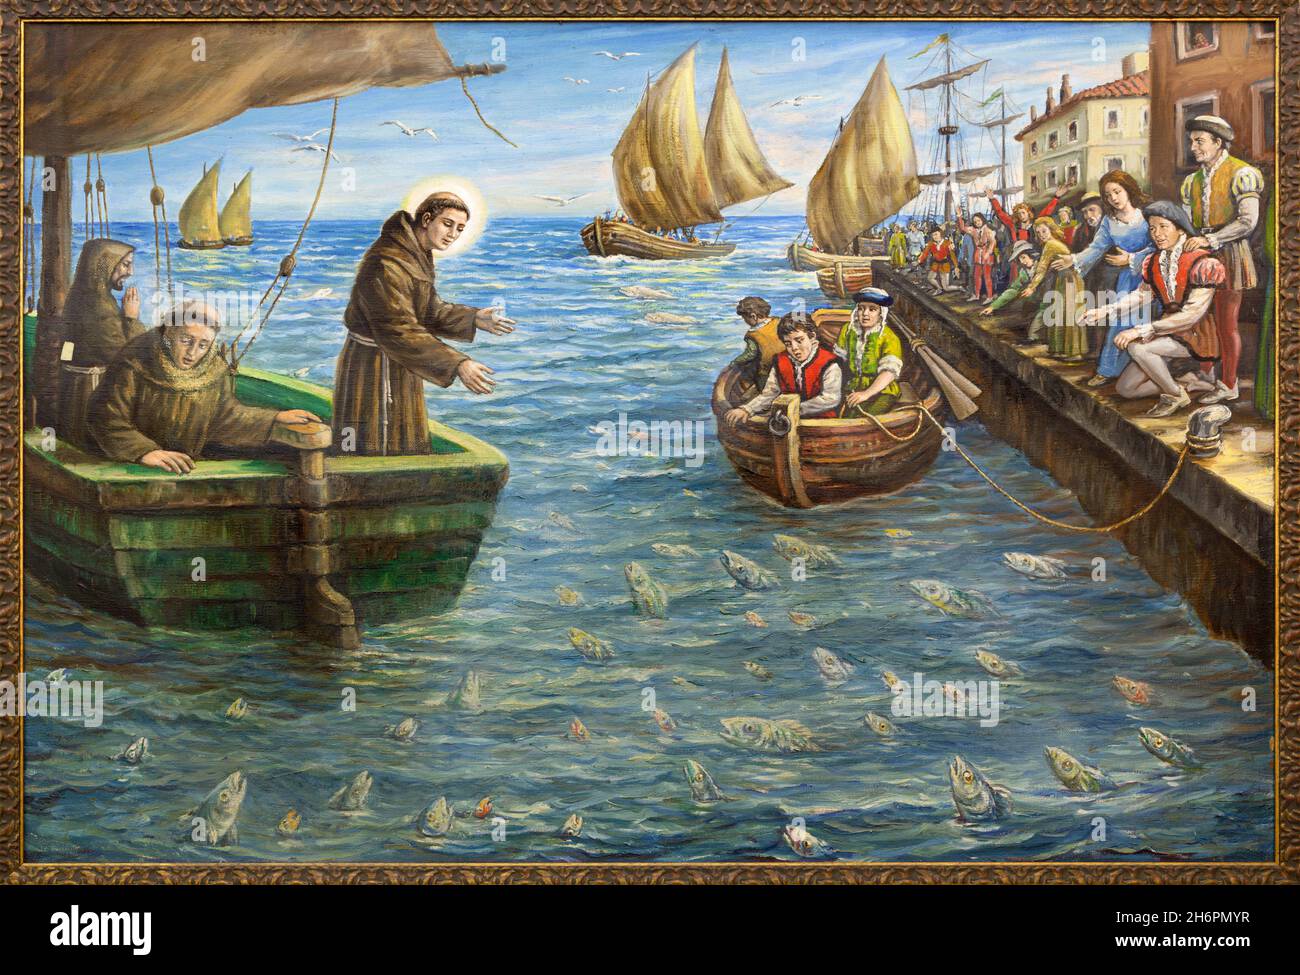 ROME, ITALY - SEPTEMBER 2, 2021: The painting of St Anthony Preaching to the Fish in the church Basilica di Sant'n Antonio al Laterano Stock Photo